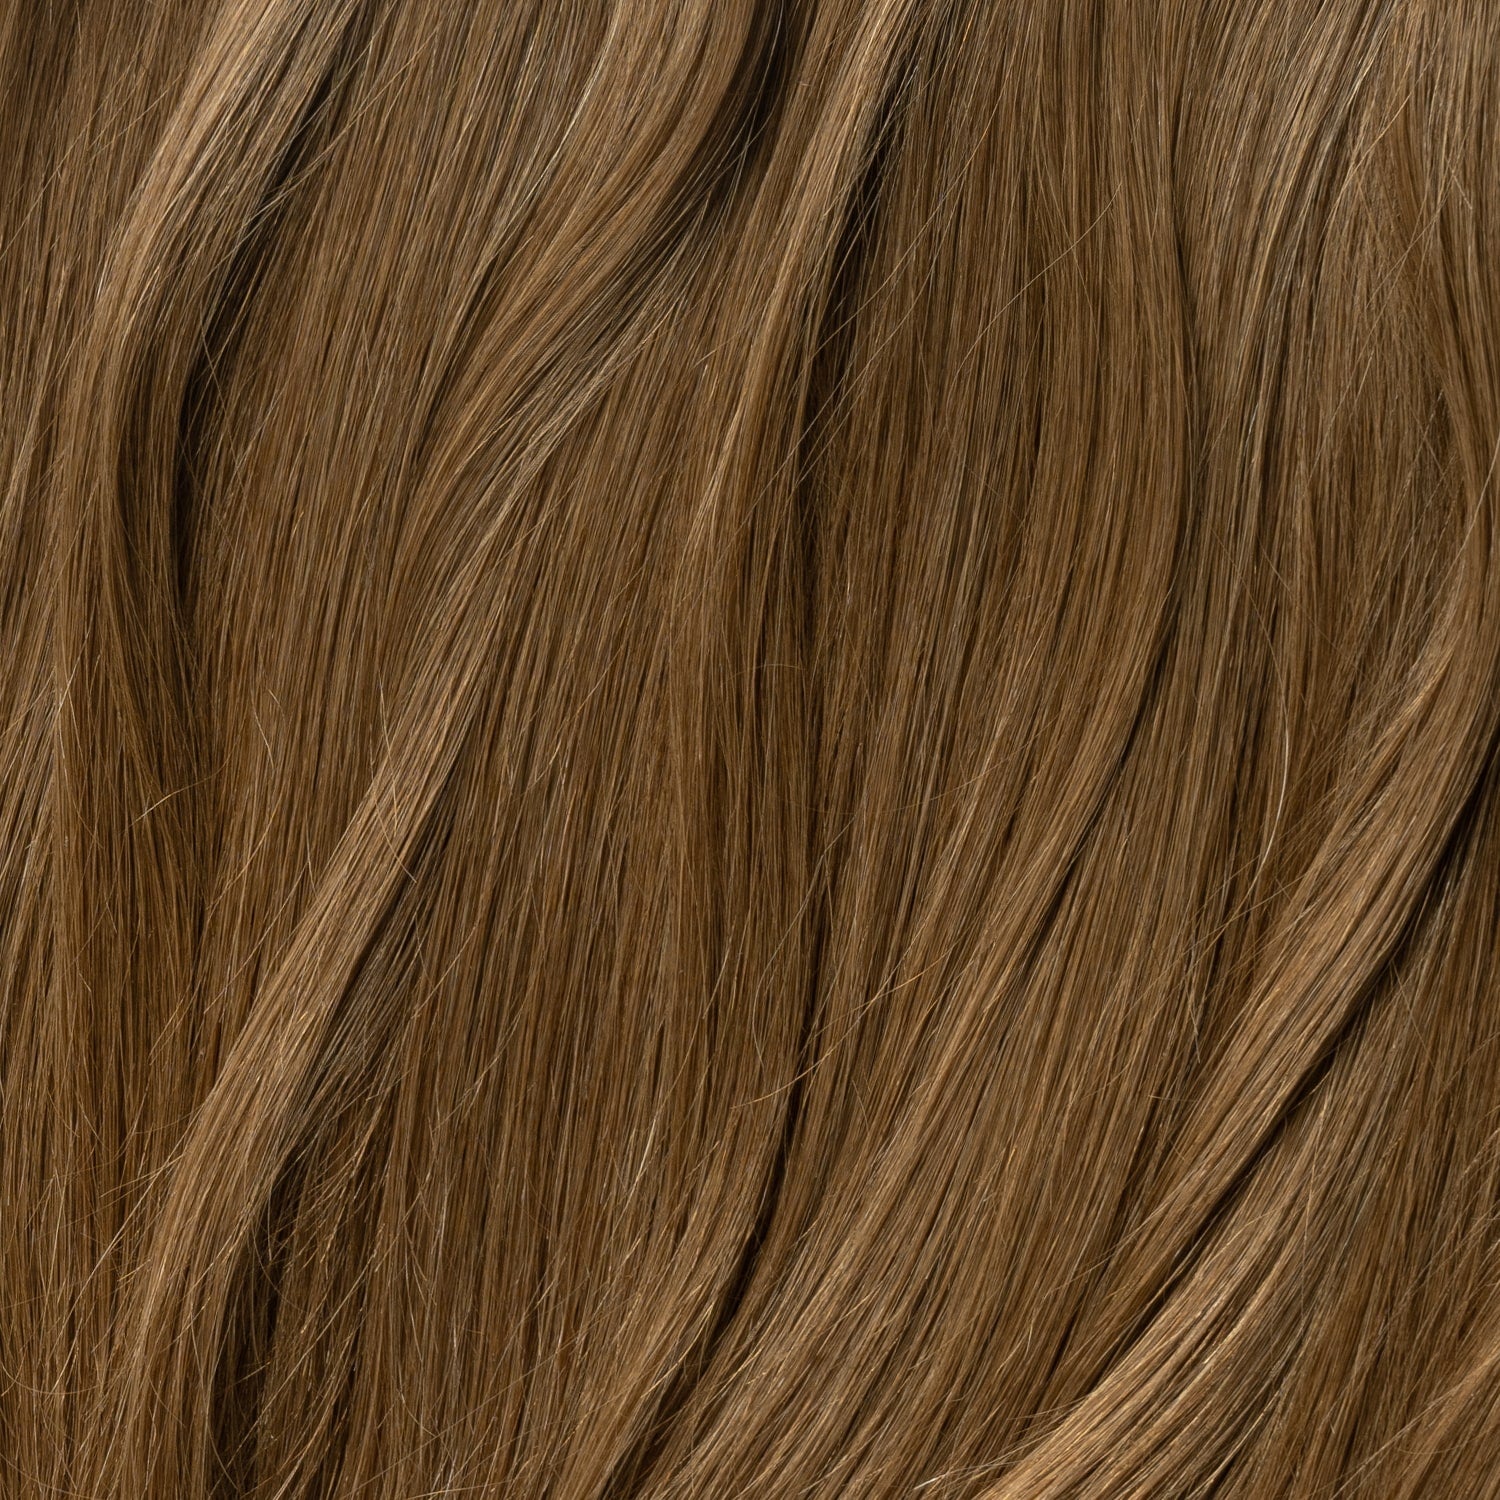 Flip in Extensions - Natural Brown 3